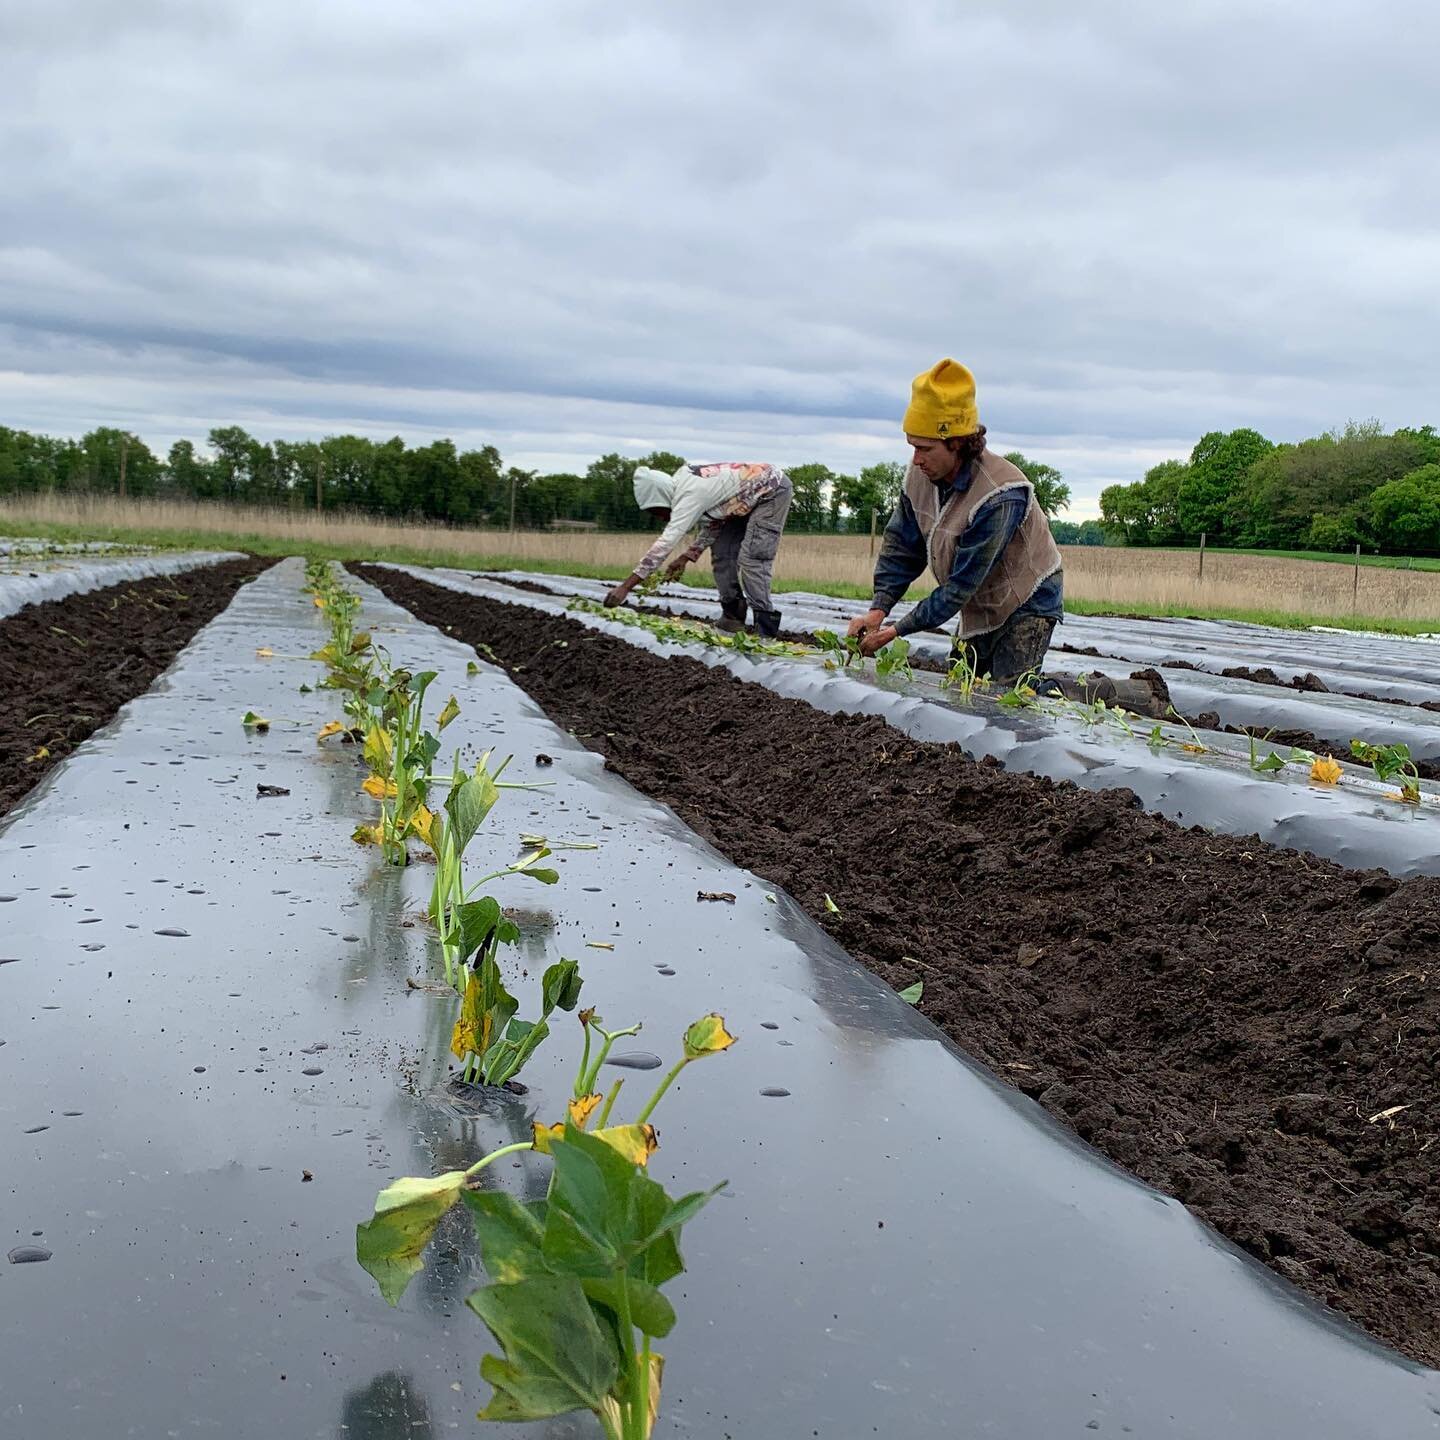 What a perfect way to end a cool, damp day - planting sweet potatoes.  While sweet potatoes are a warm season crop that needs lots of heat during the summer to produce a decent yield, establishment is always a gamble. The planting material, called &l